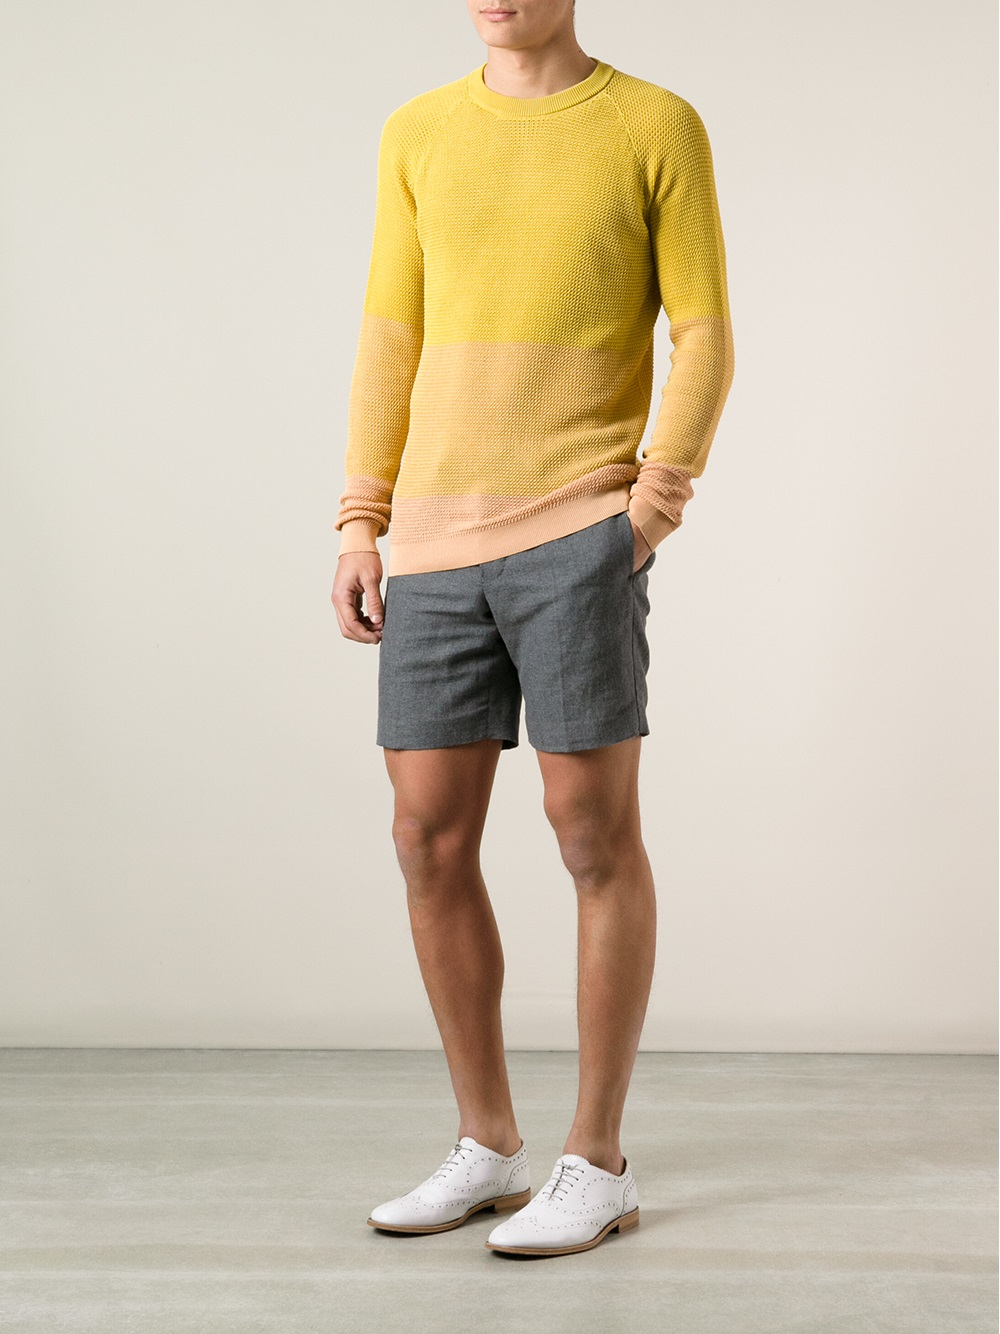 Lyst - Paul smith Knitted Gradient Colour Sweater in Orange for Men